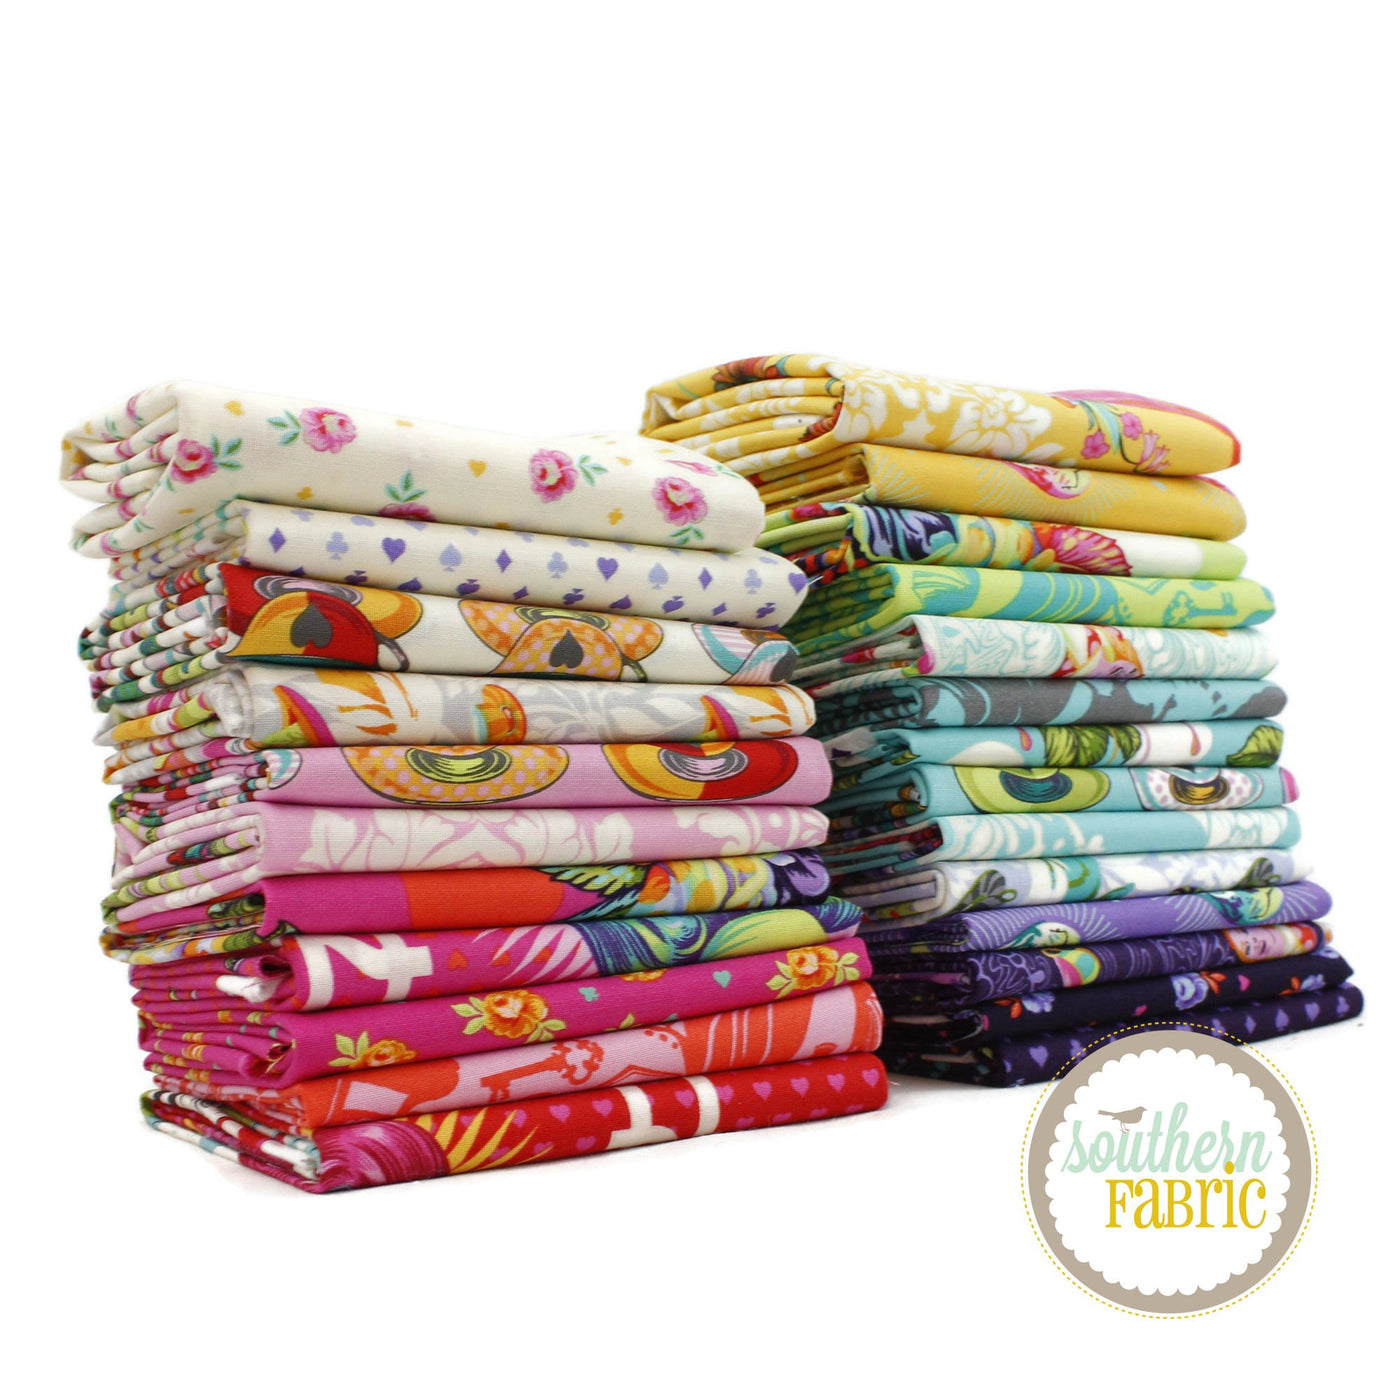 Curiouser and Curiouser Half Yard Bundle (25 pcs) by Tula Pink for Free Spirit